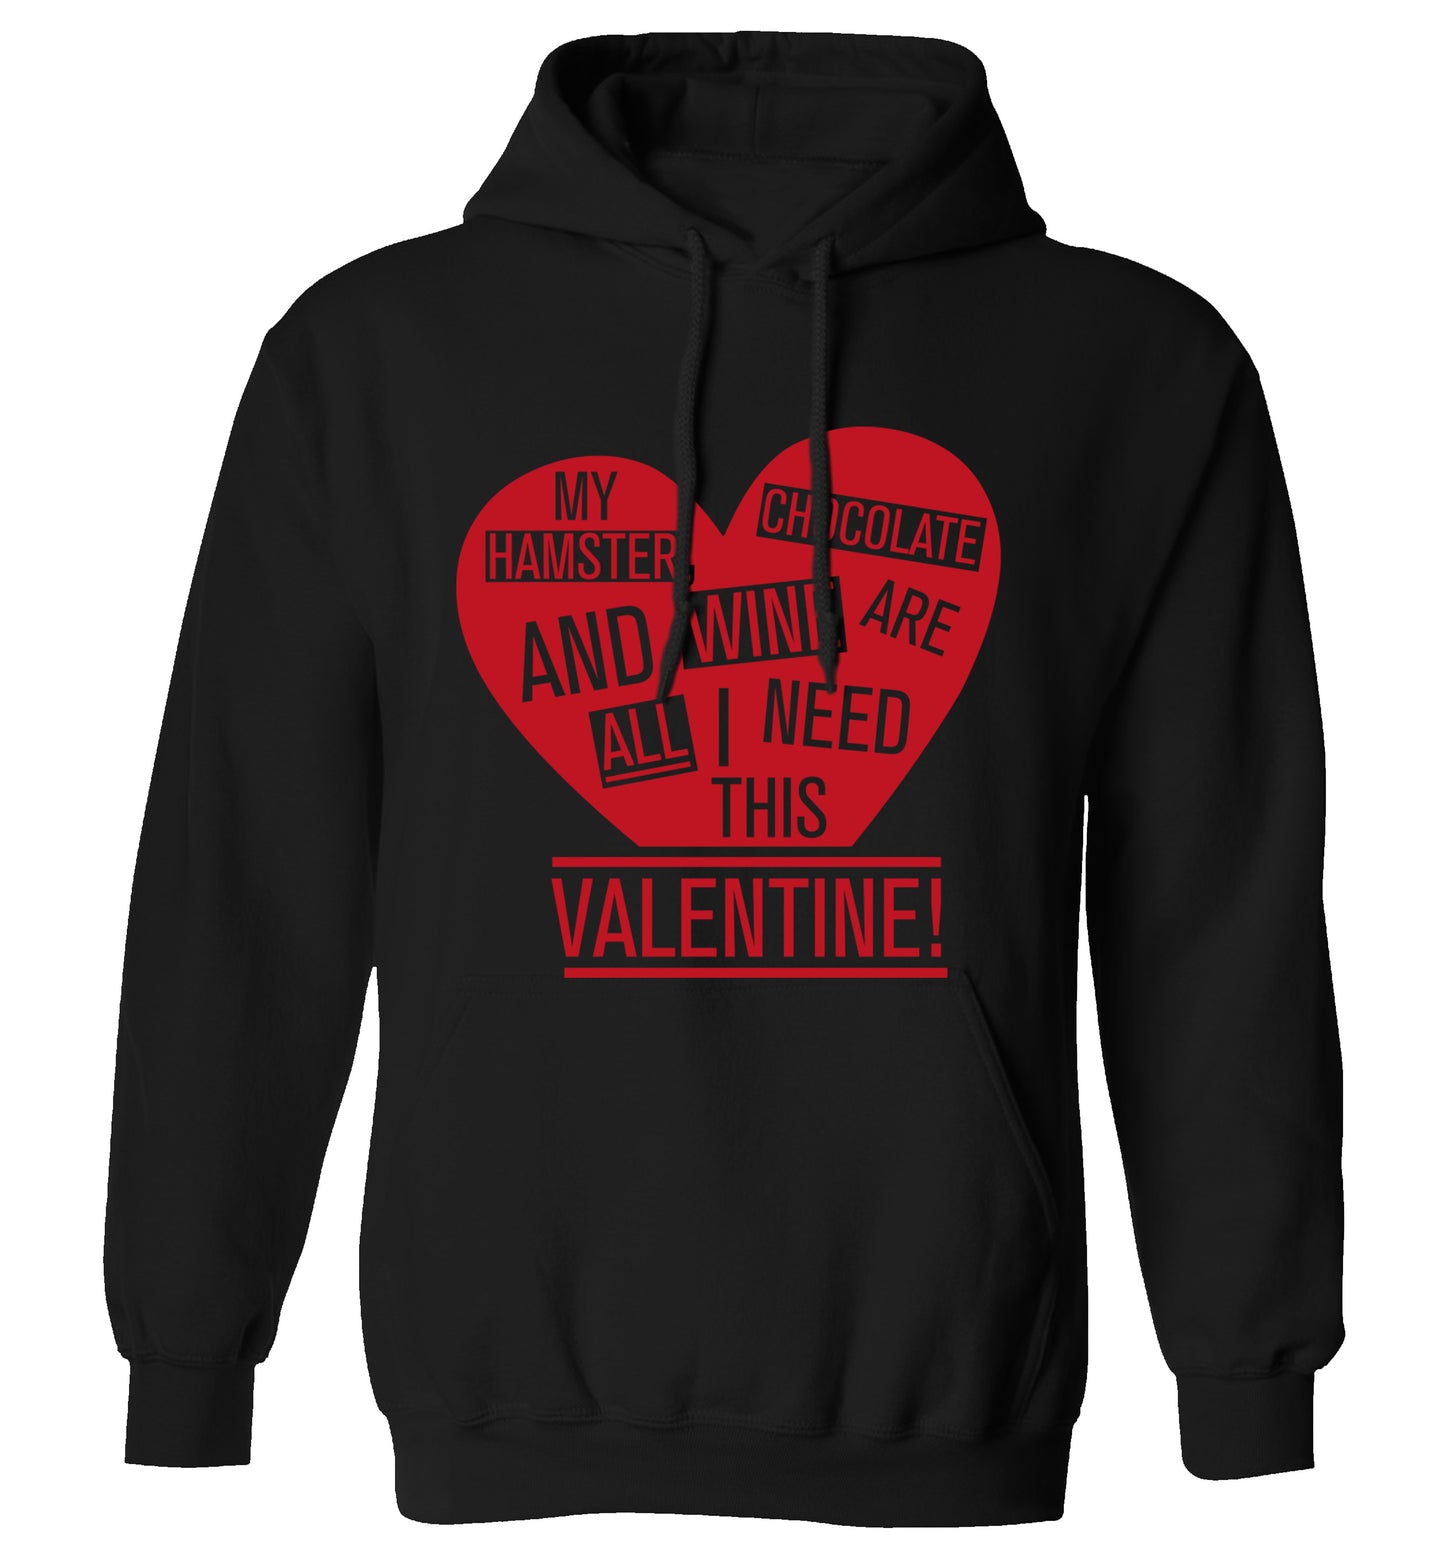 My hamster, chocolate and wine are all I need this valentine! adults unisex black hoodie 2XL